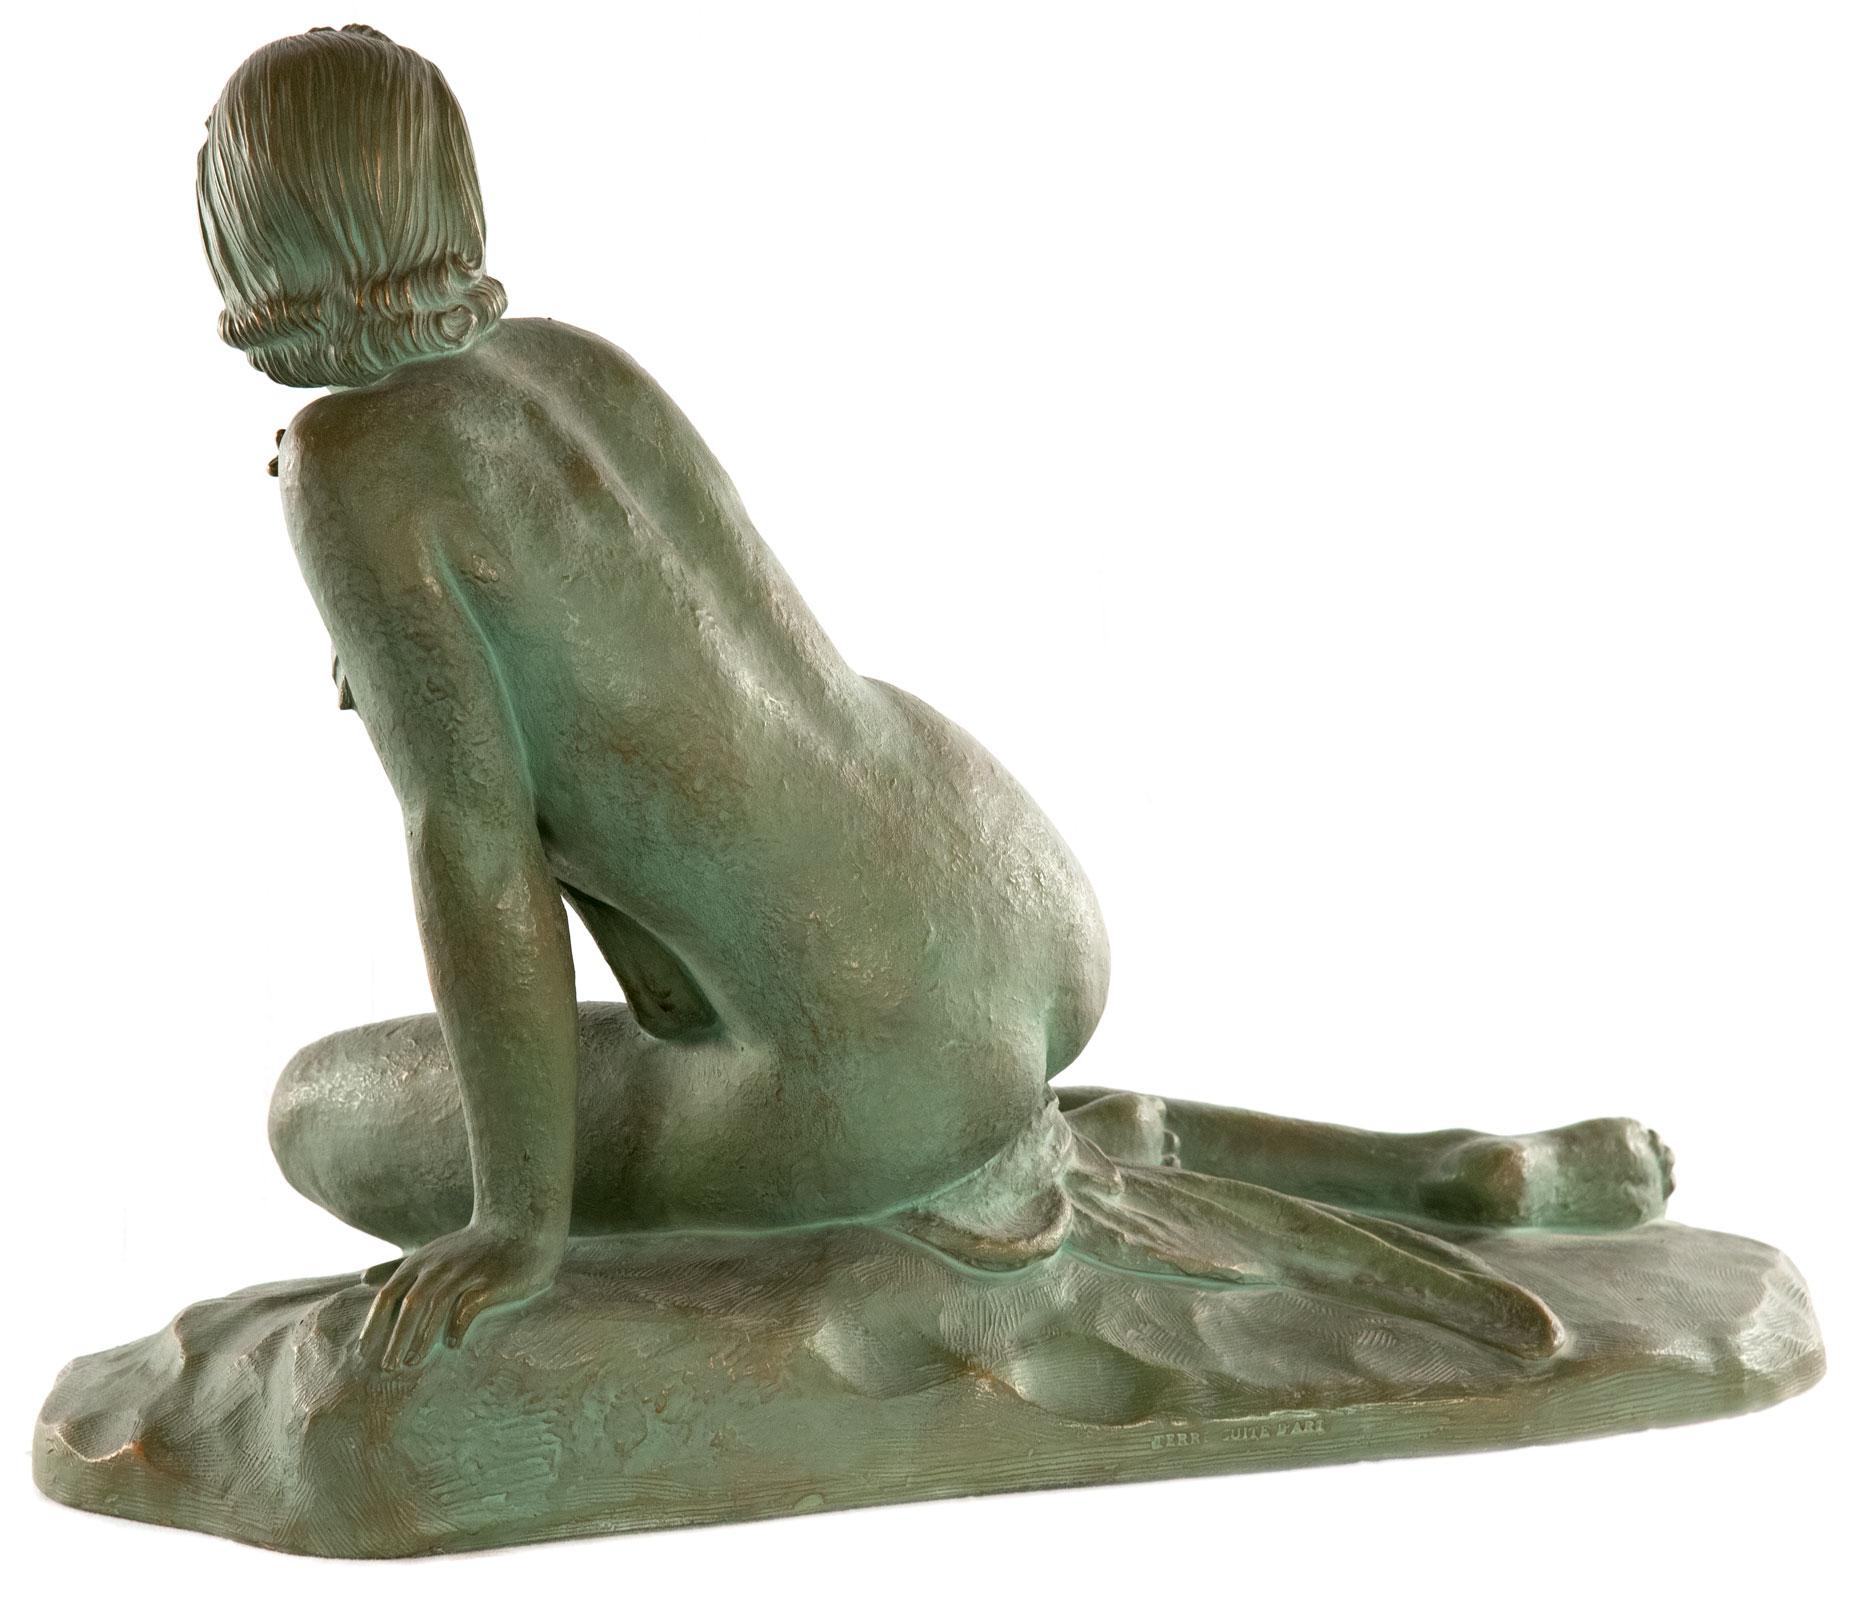 This beautiful, green patinated terracotta sculpture represents a typical Art Deco work by Italian sculptor Ugo Cipriani.